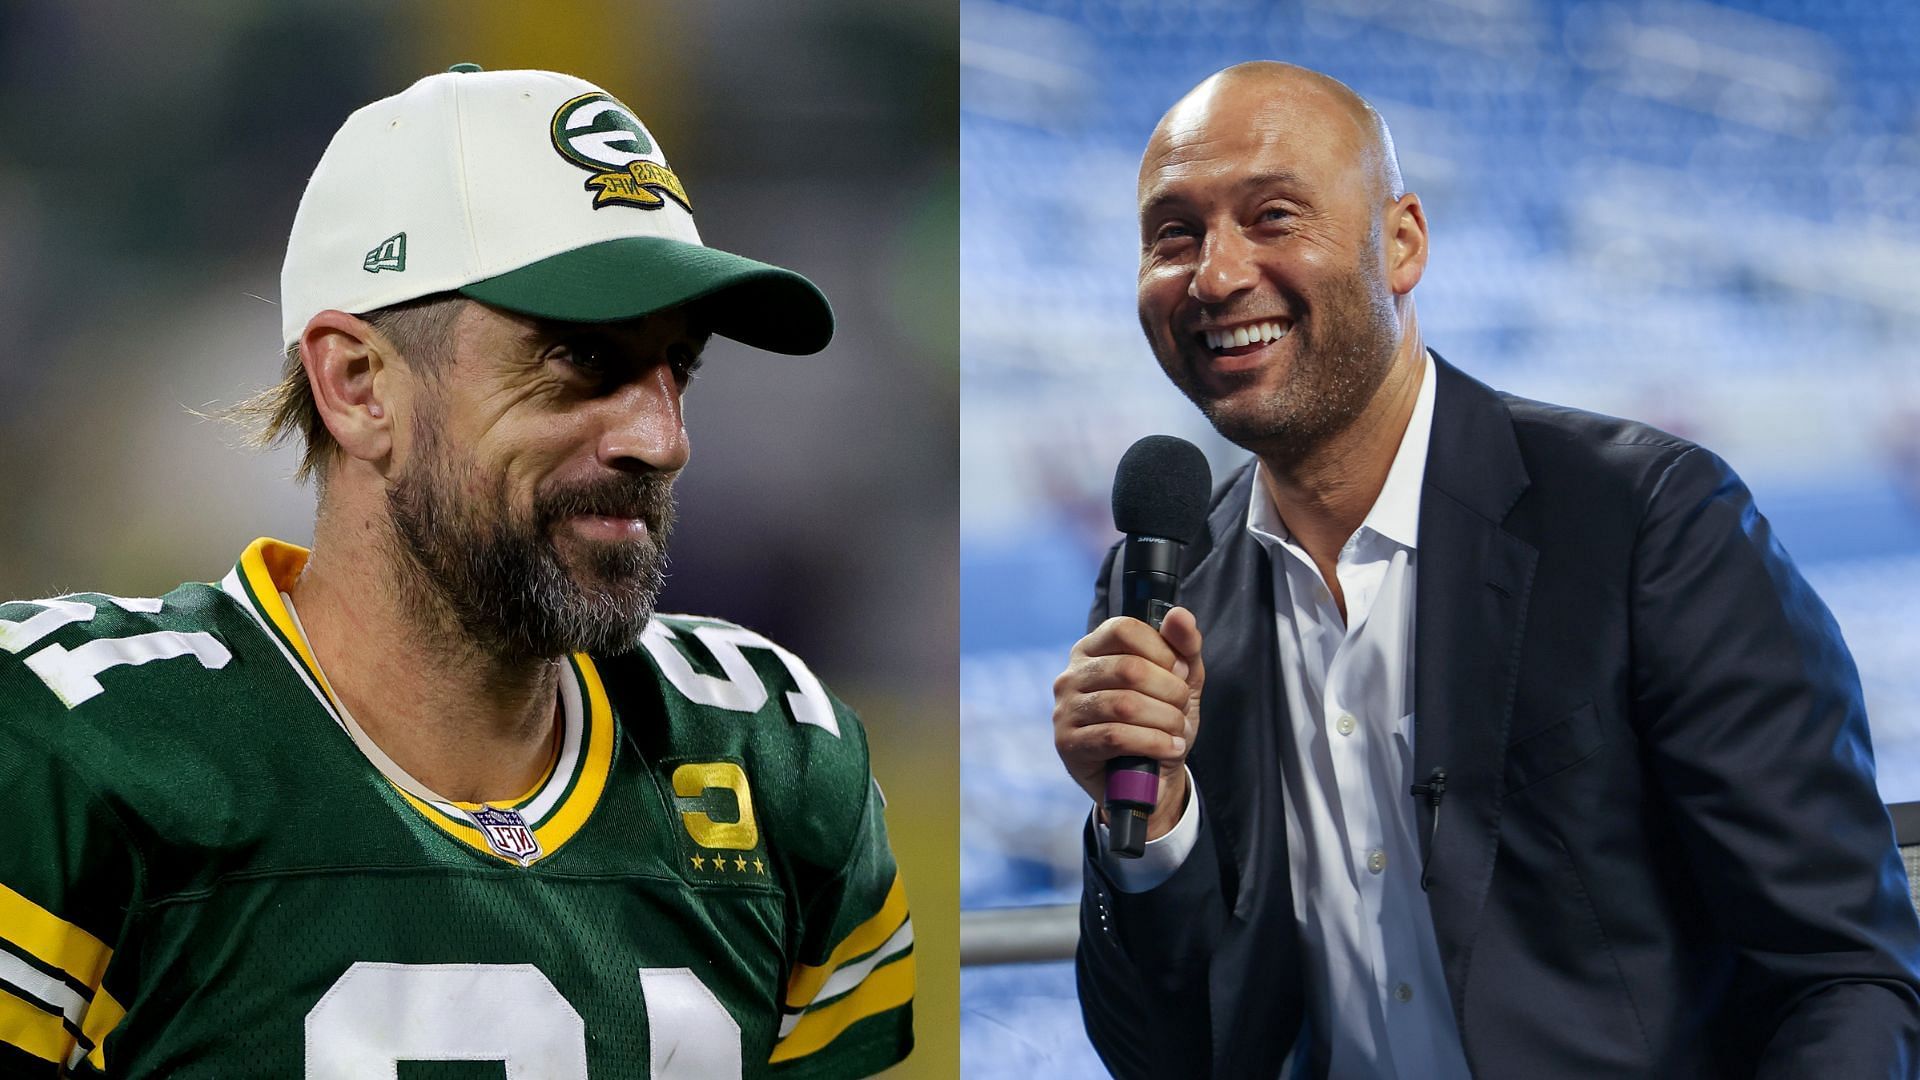 American host Bill Maher compared Aaron Rodgers to NY Yankees legend Derek Jeter